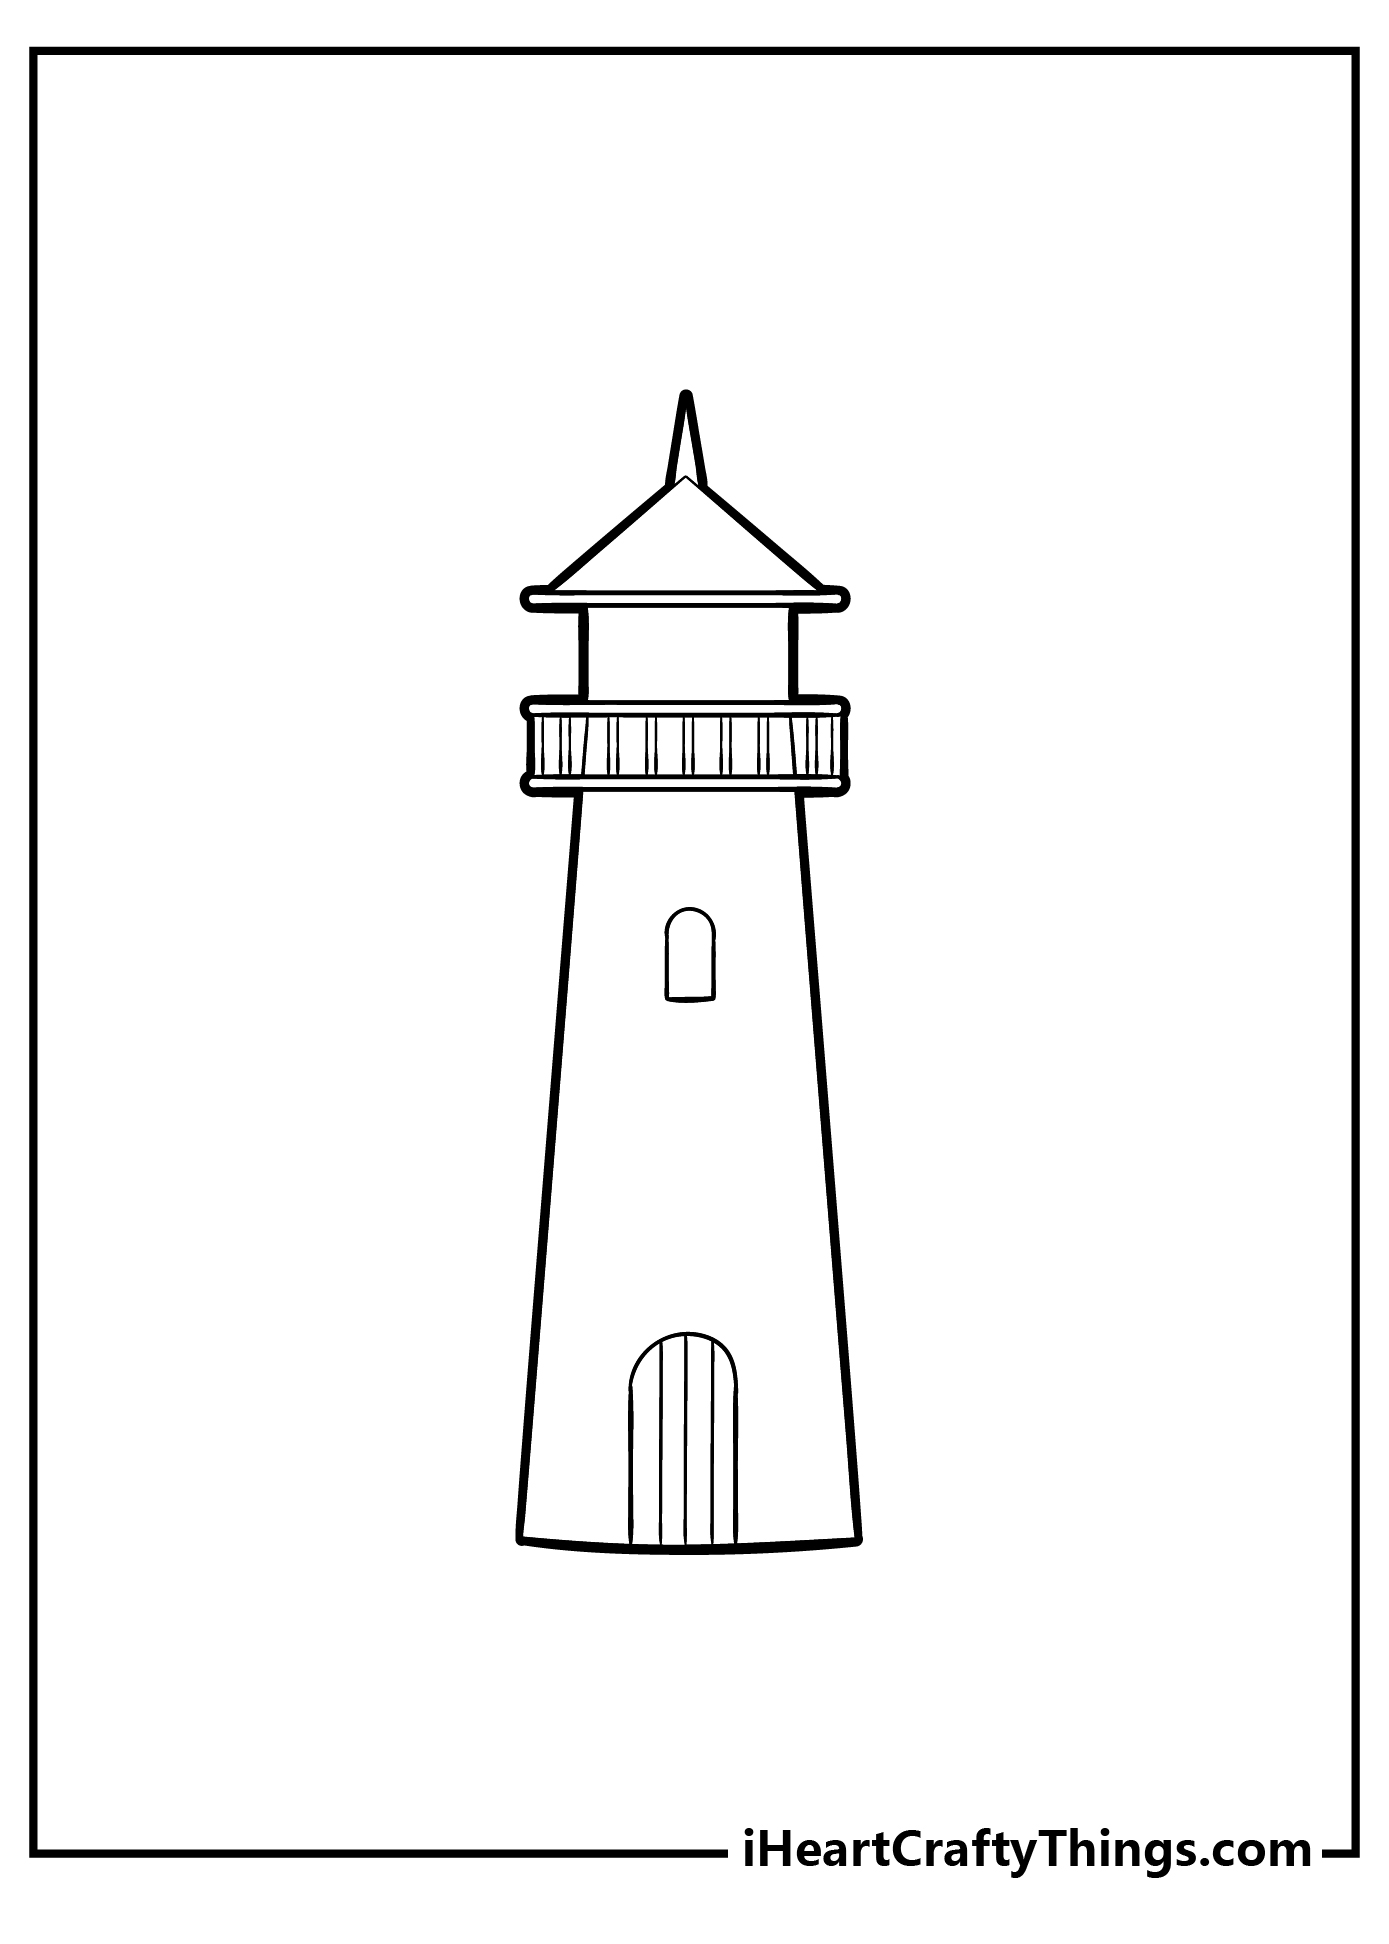 Lighthouse Coloring Pages free pdf download